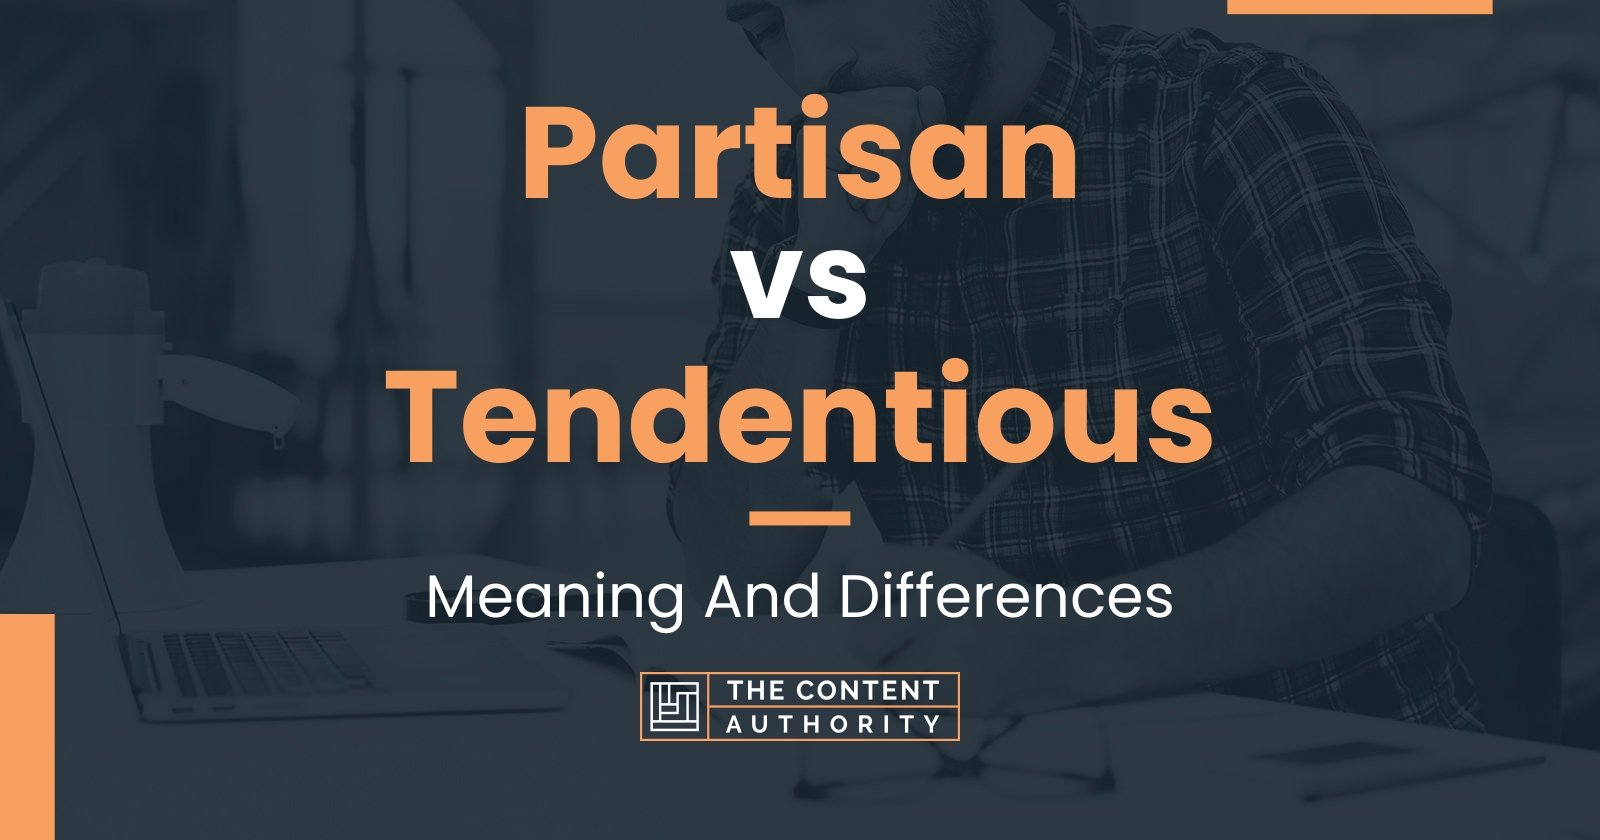 Partisan vs Tendentious: Meaning And Differences